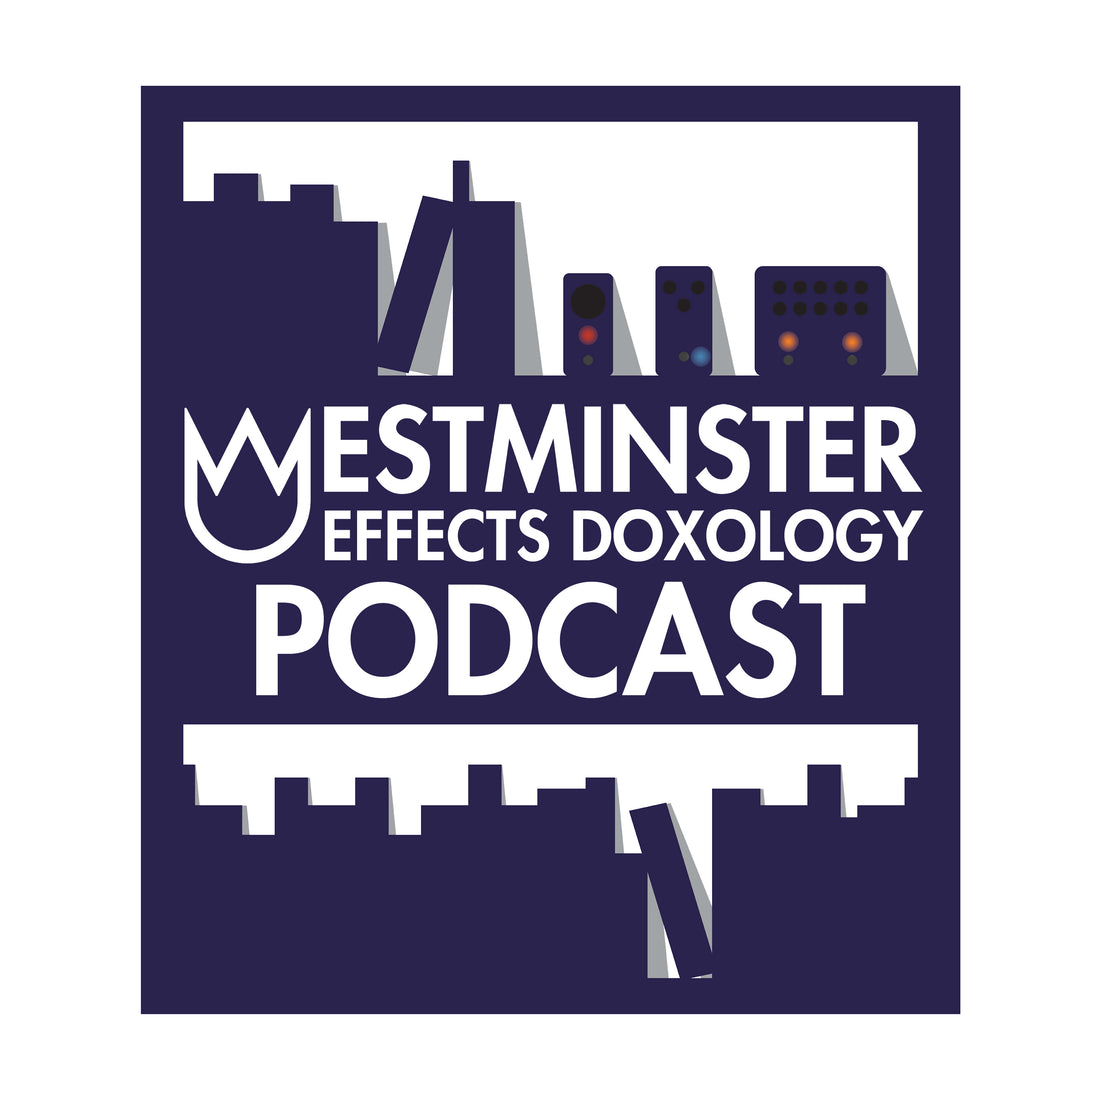 Doxology Podcast 249 - The saddest song ever.